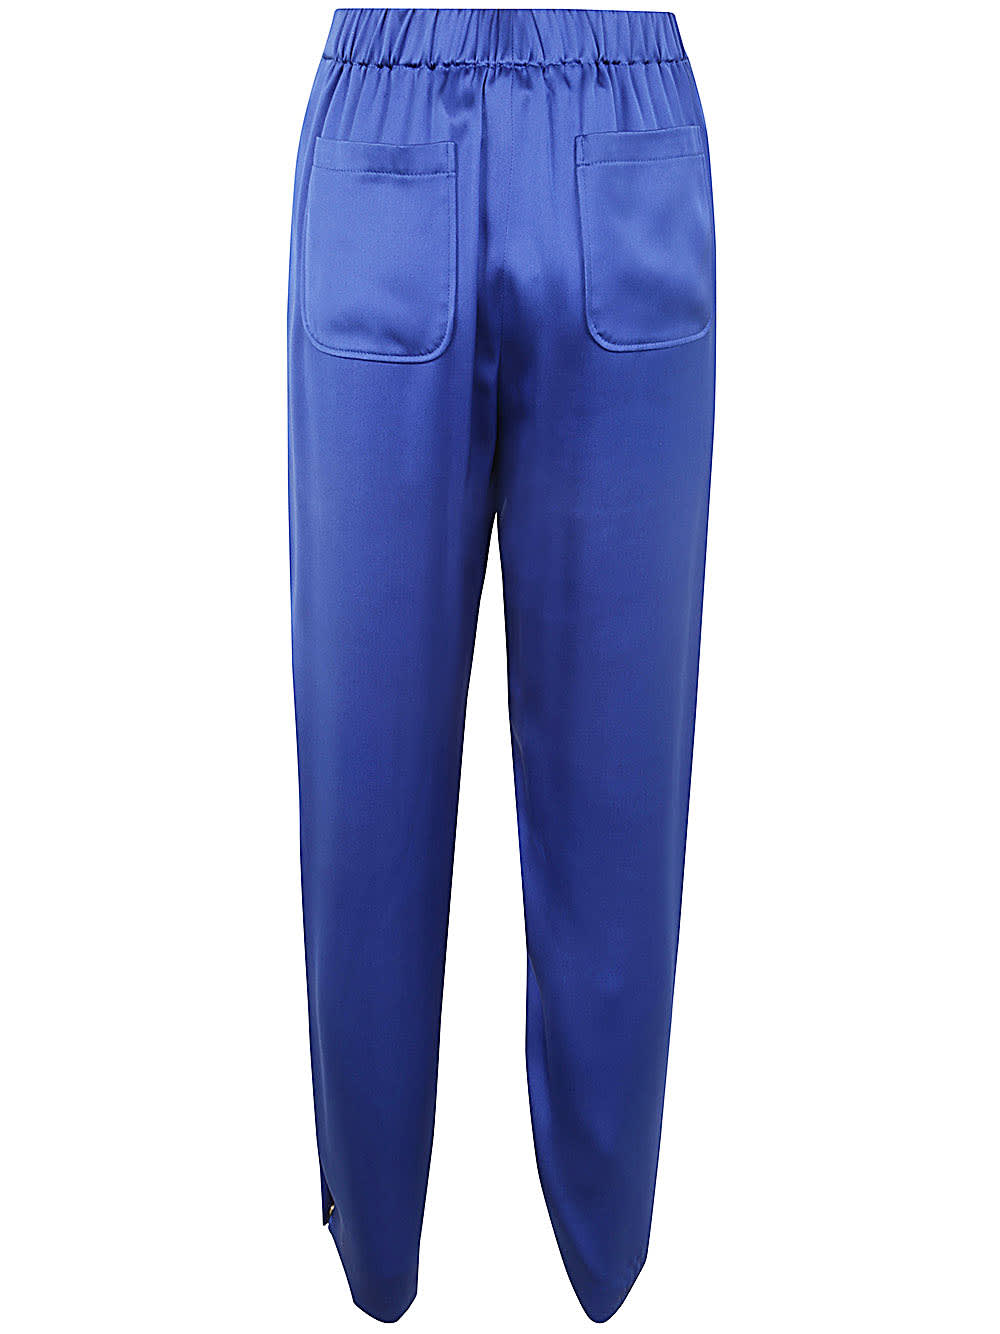 Shop Giorgio Armani Elastic Waist Pants With Button On Bottom In Ubpa Bluette